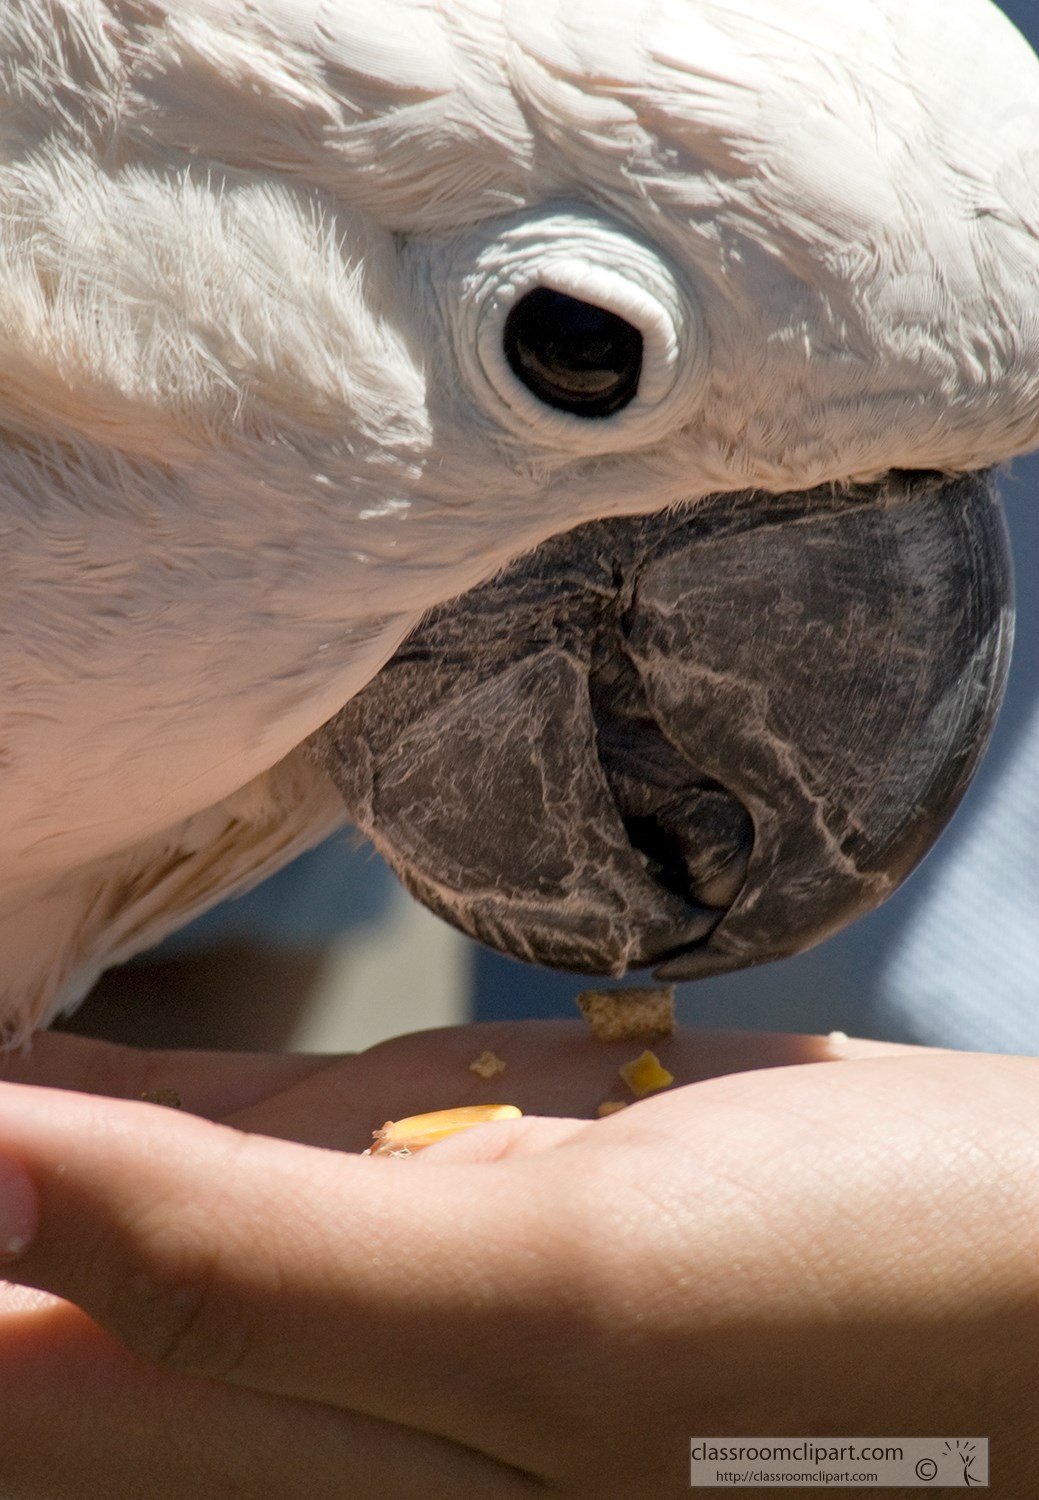 white-cockatoo-parrot-eating-food-from-hand.jpg